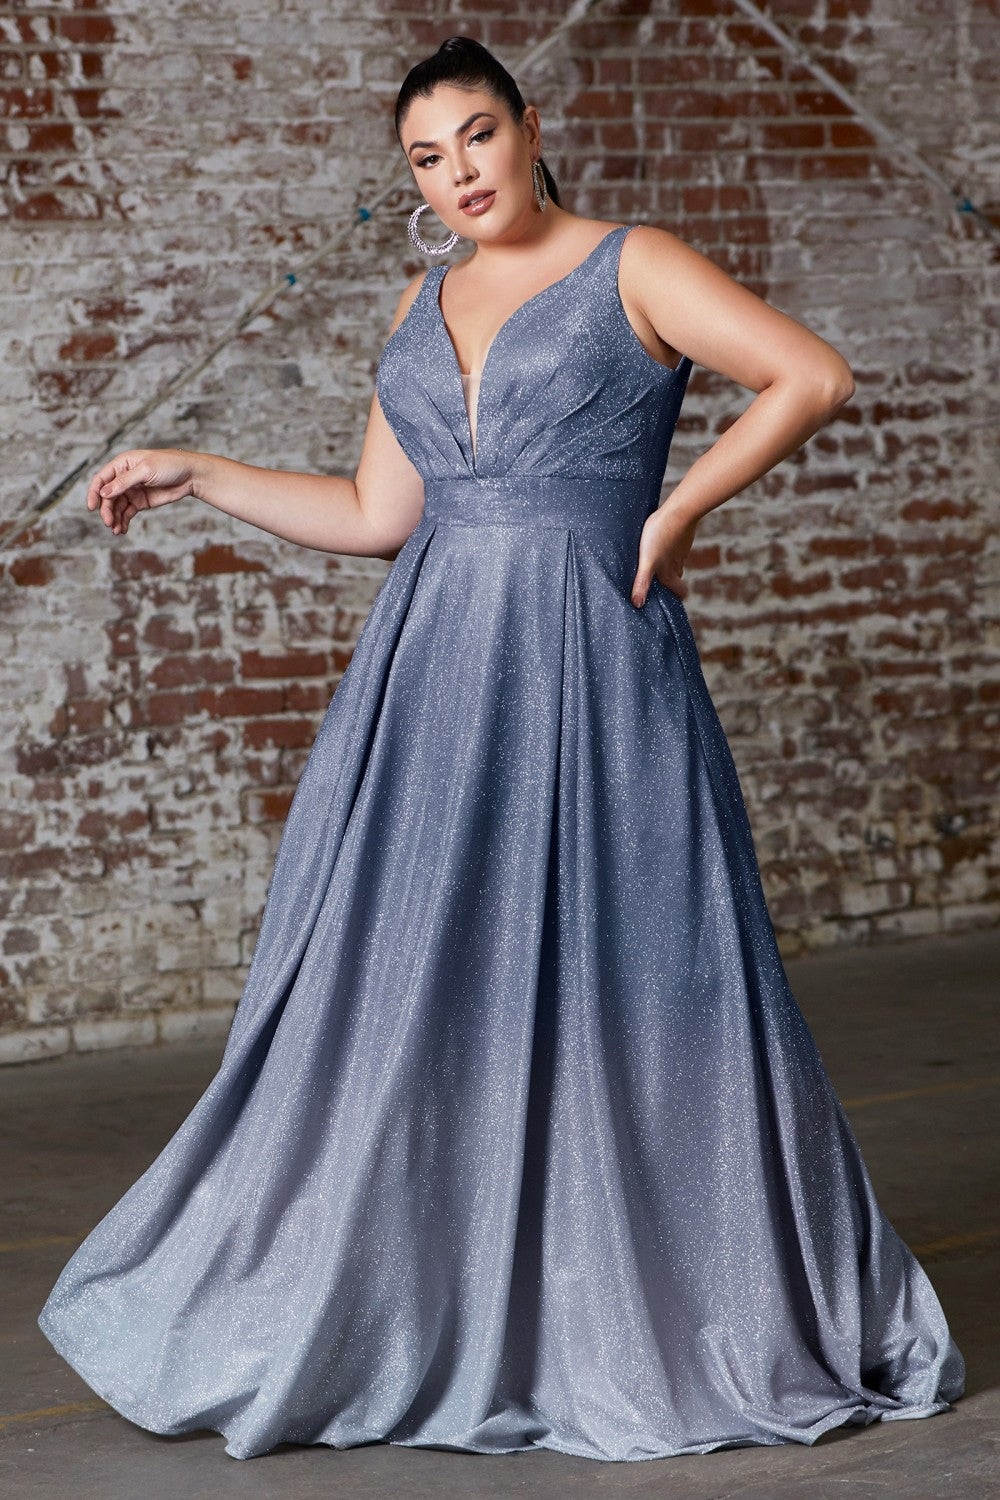 Glitter Ombre Ball & Prom Plus Size Gown Luxury Style Golden Appliqué Fitted V-neck Bodice Gradient A-line Curvy Dress CD9174C-2